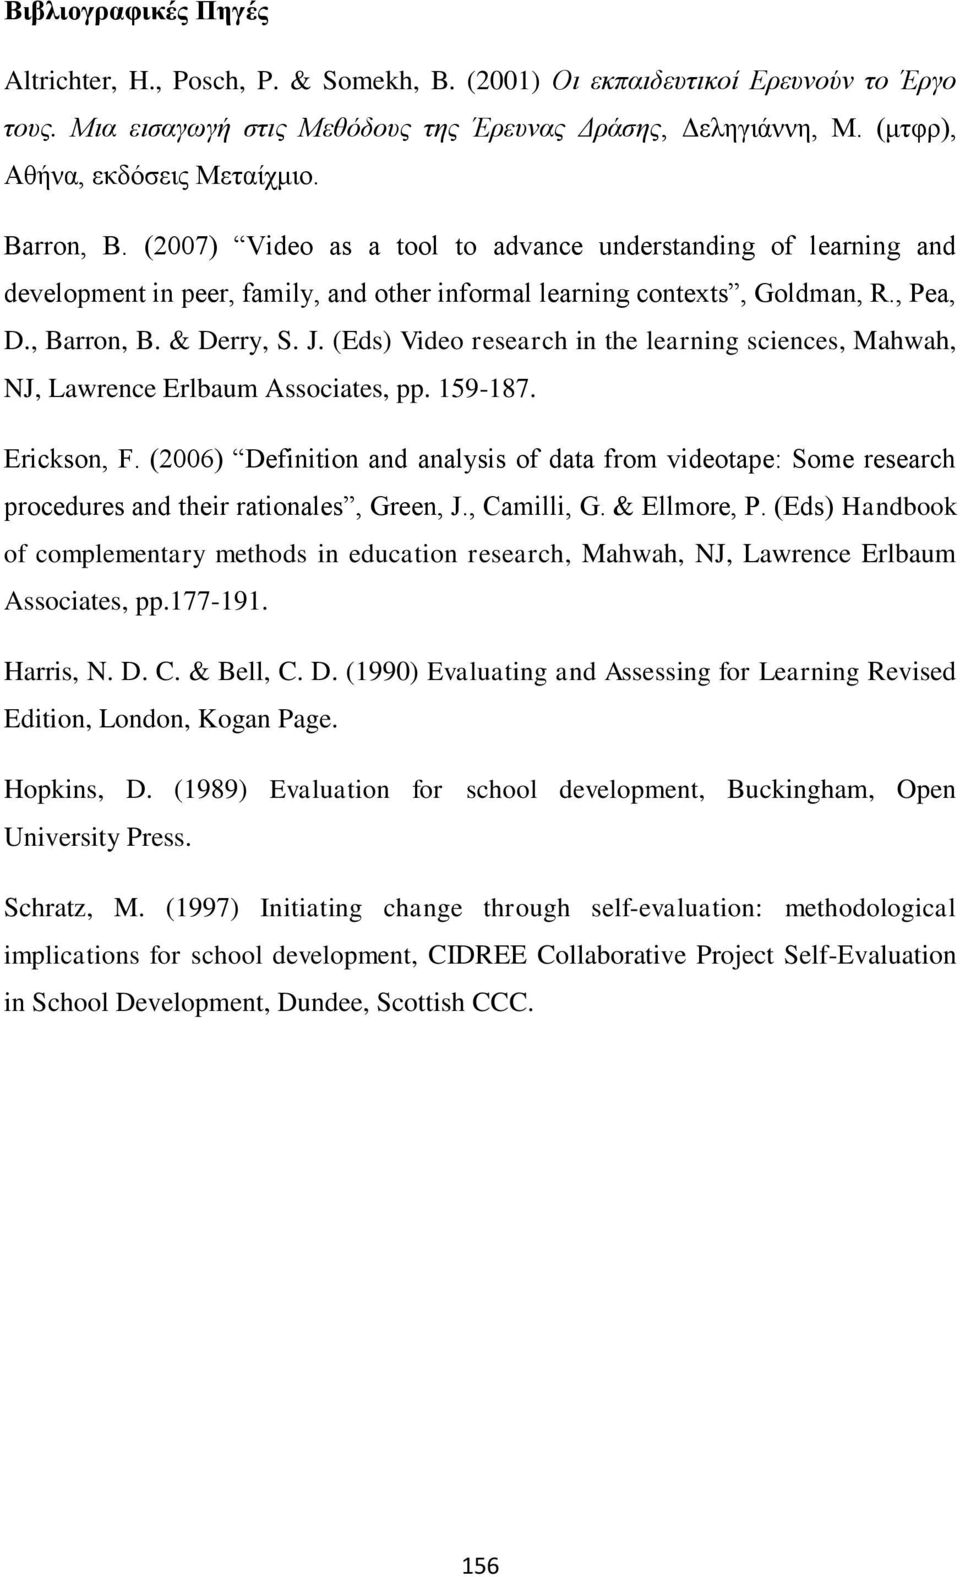 , Barron, B. & Derry, S. J. (Eds) Video research in the learning sciences, Mahwah, NJ, Lawrence Erlbaum Associates, pp. 159-187. Erickson, F.